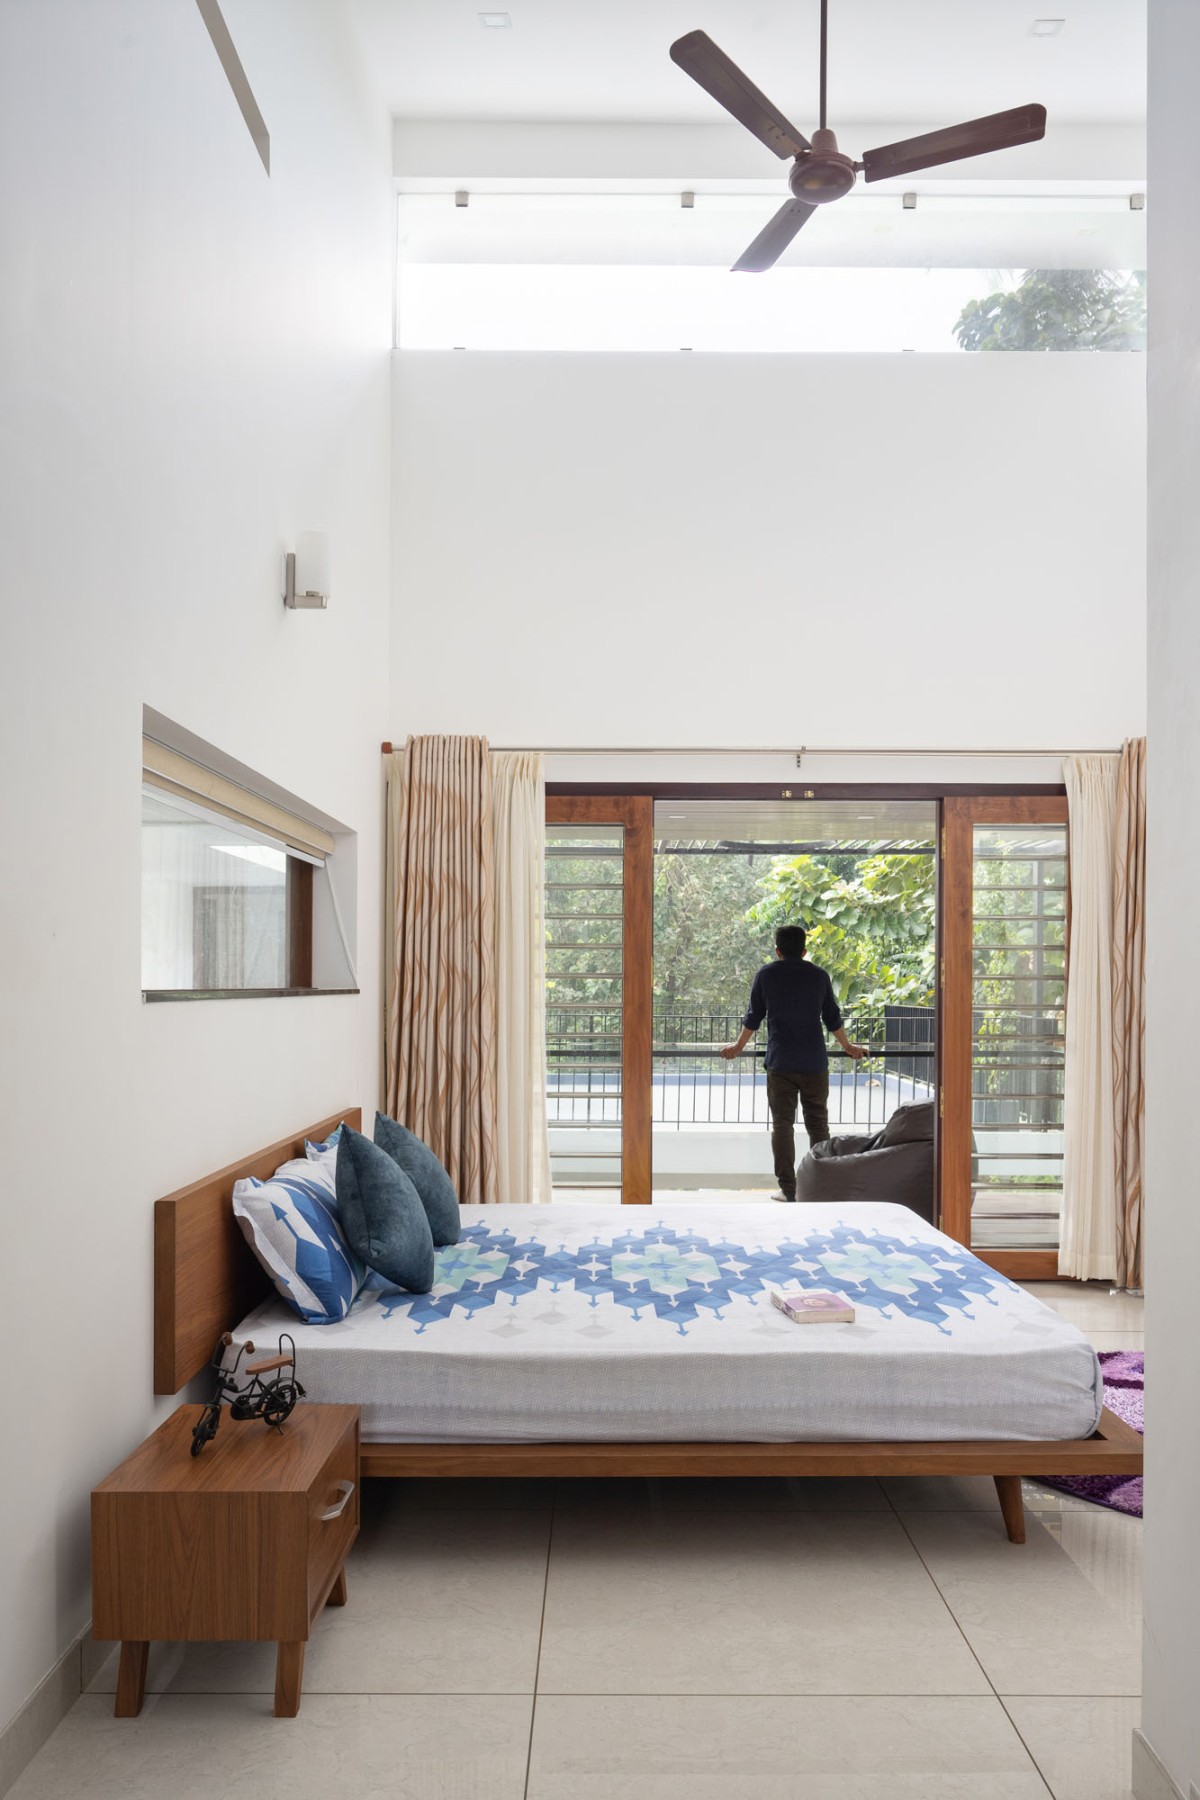 Bedroom 2 of The Frangipani House by Designature Architects